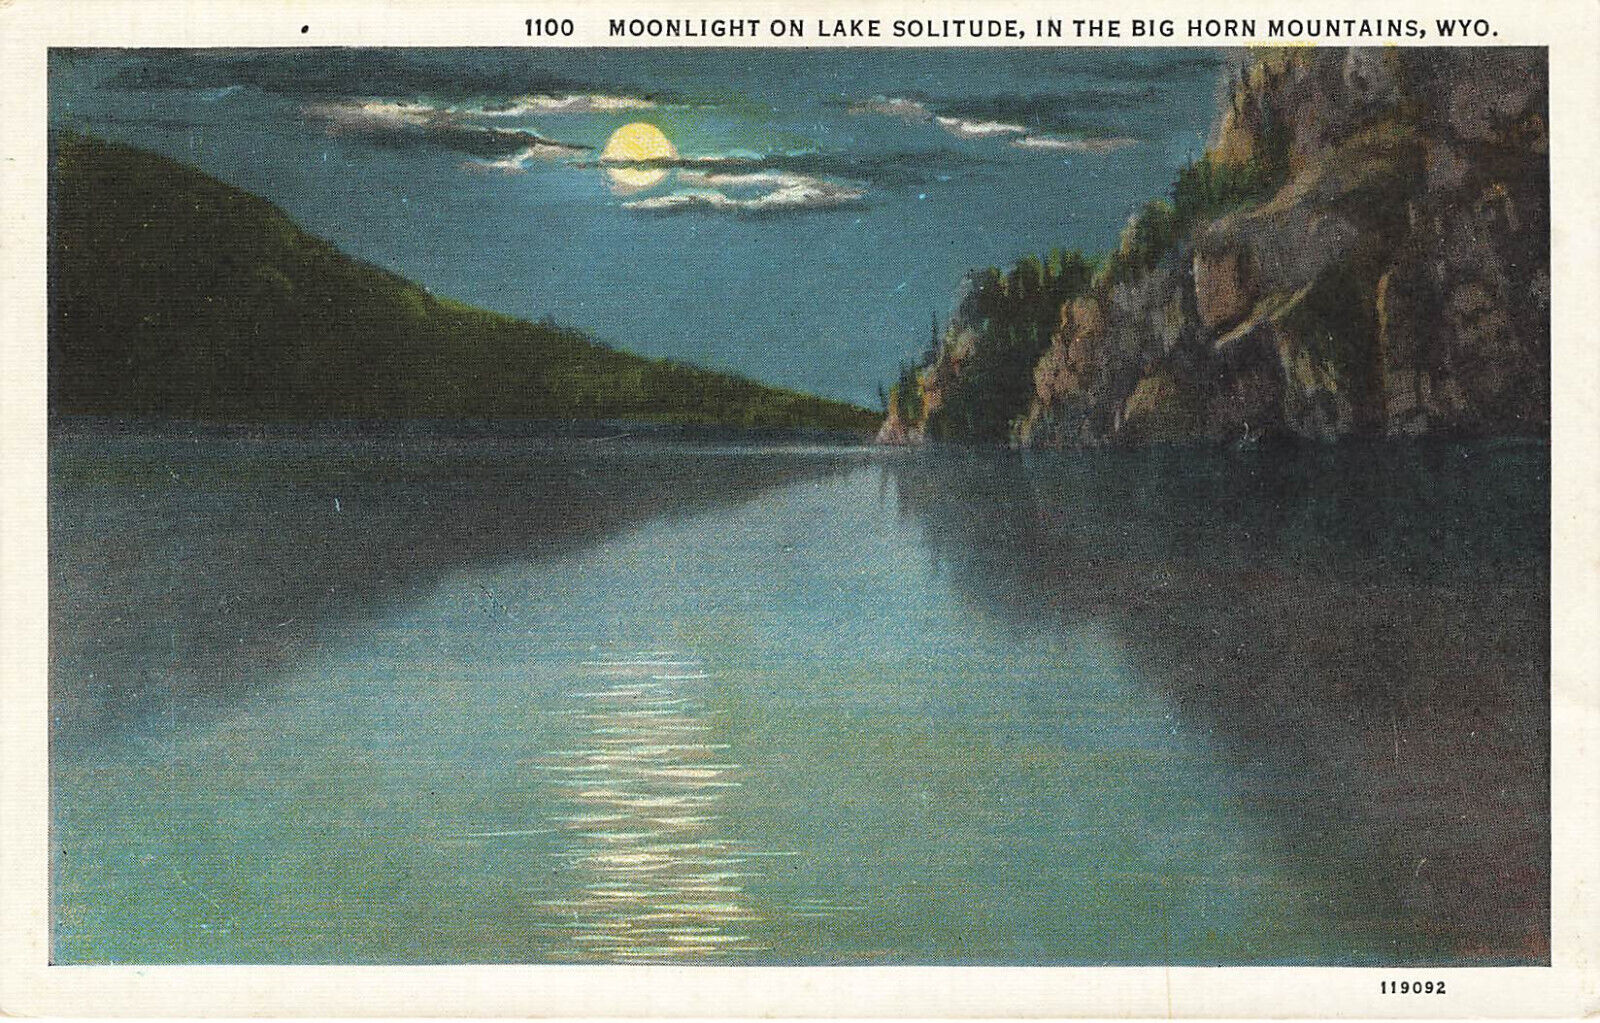 NIGHT MOONLIGHT ON LAKE SOLITUDE POSTCARD BIG HORN MOUNTAINS WY WYOMING 1930s